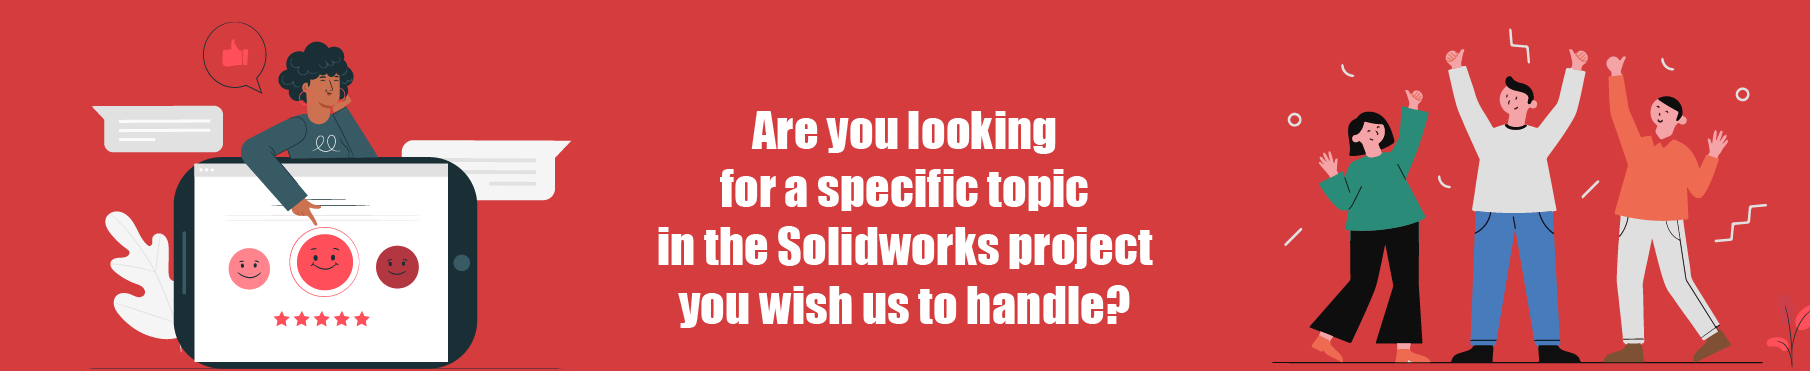 Do My Solidworks Project Banner 4